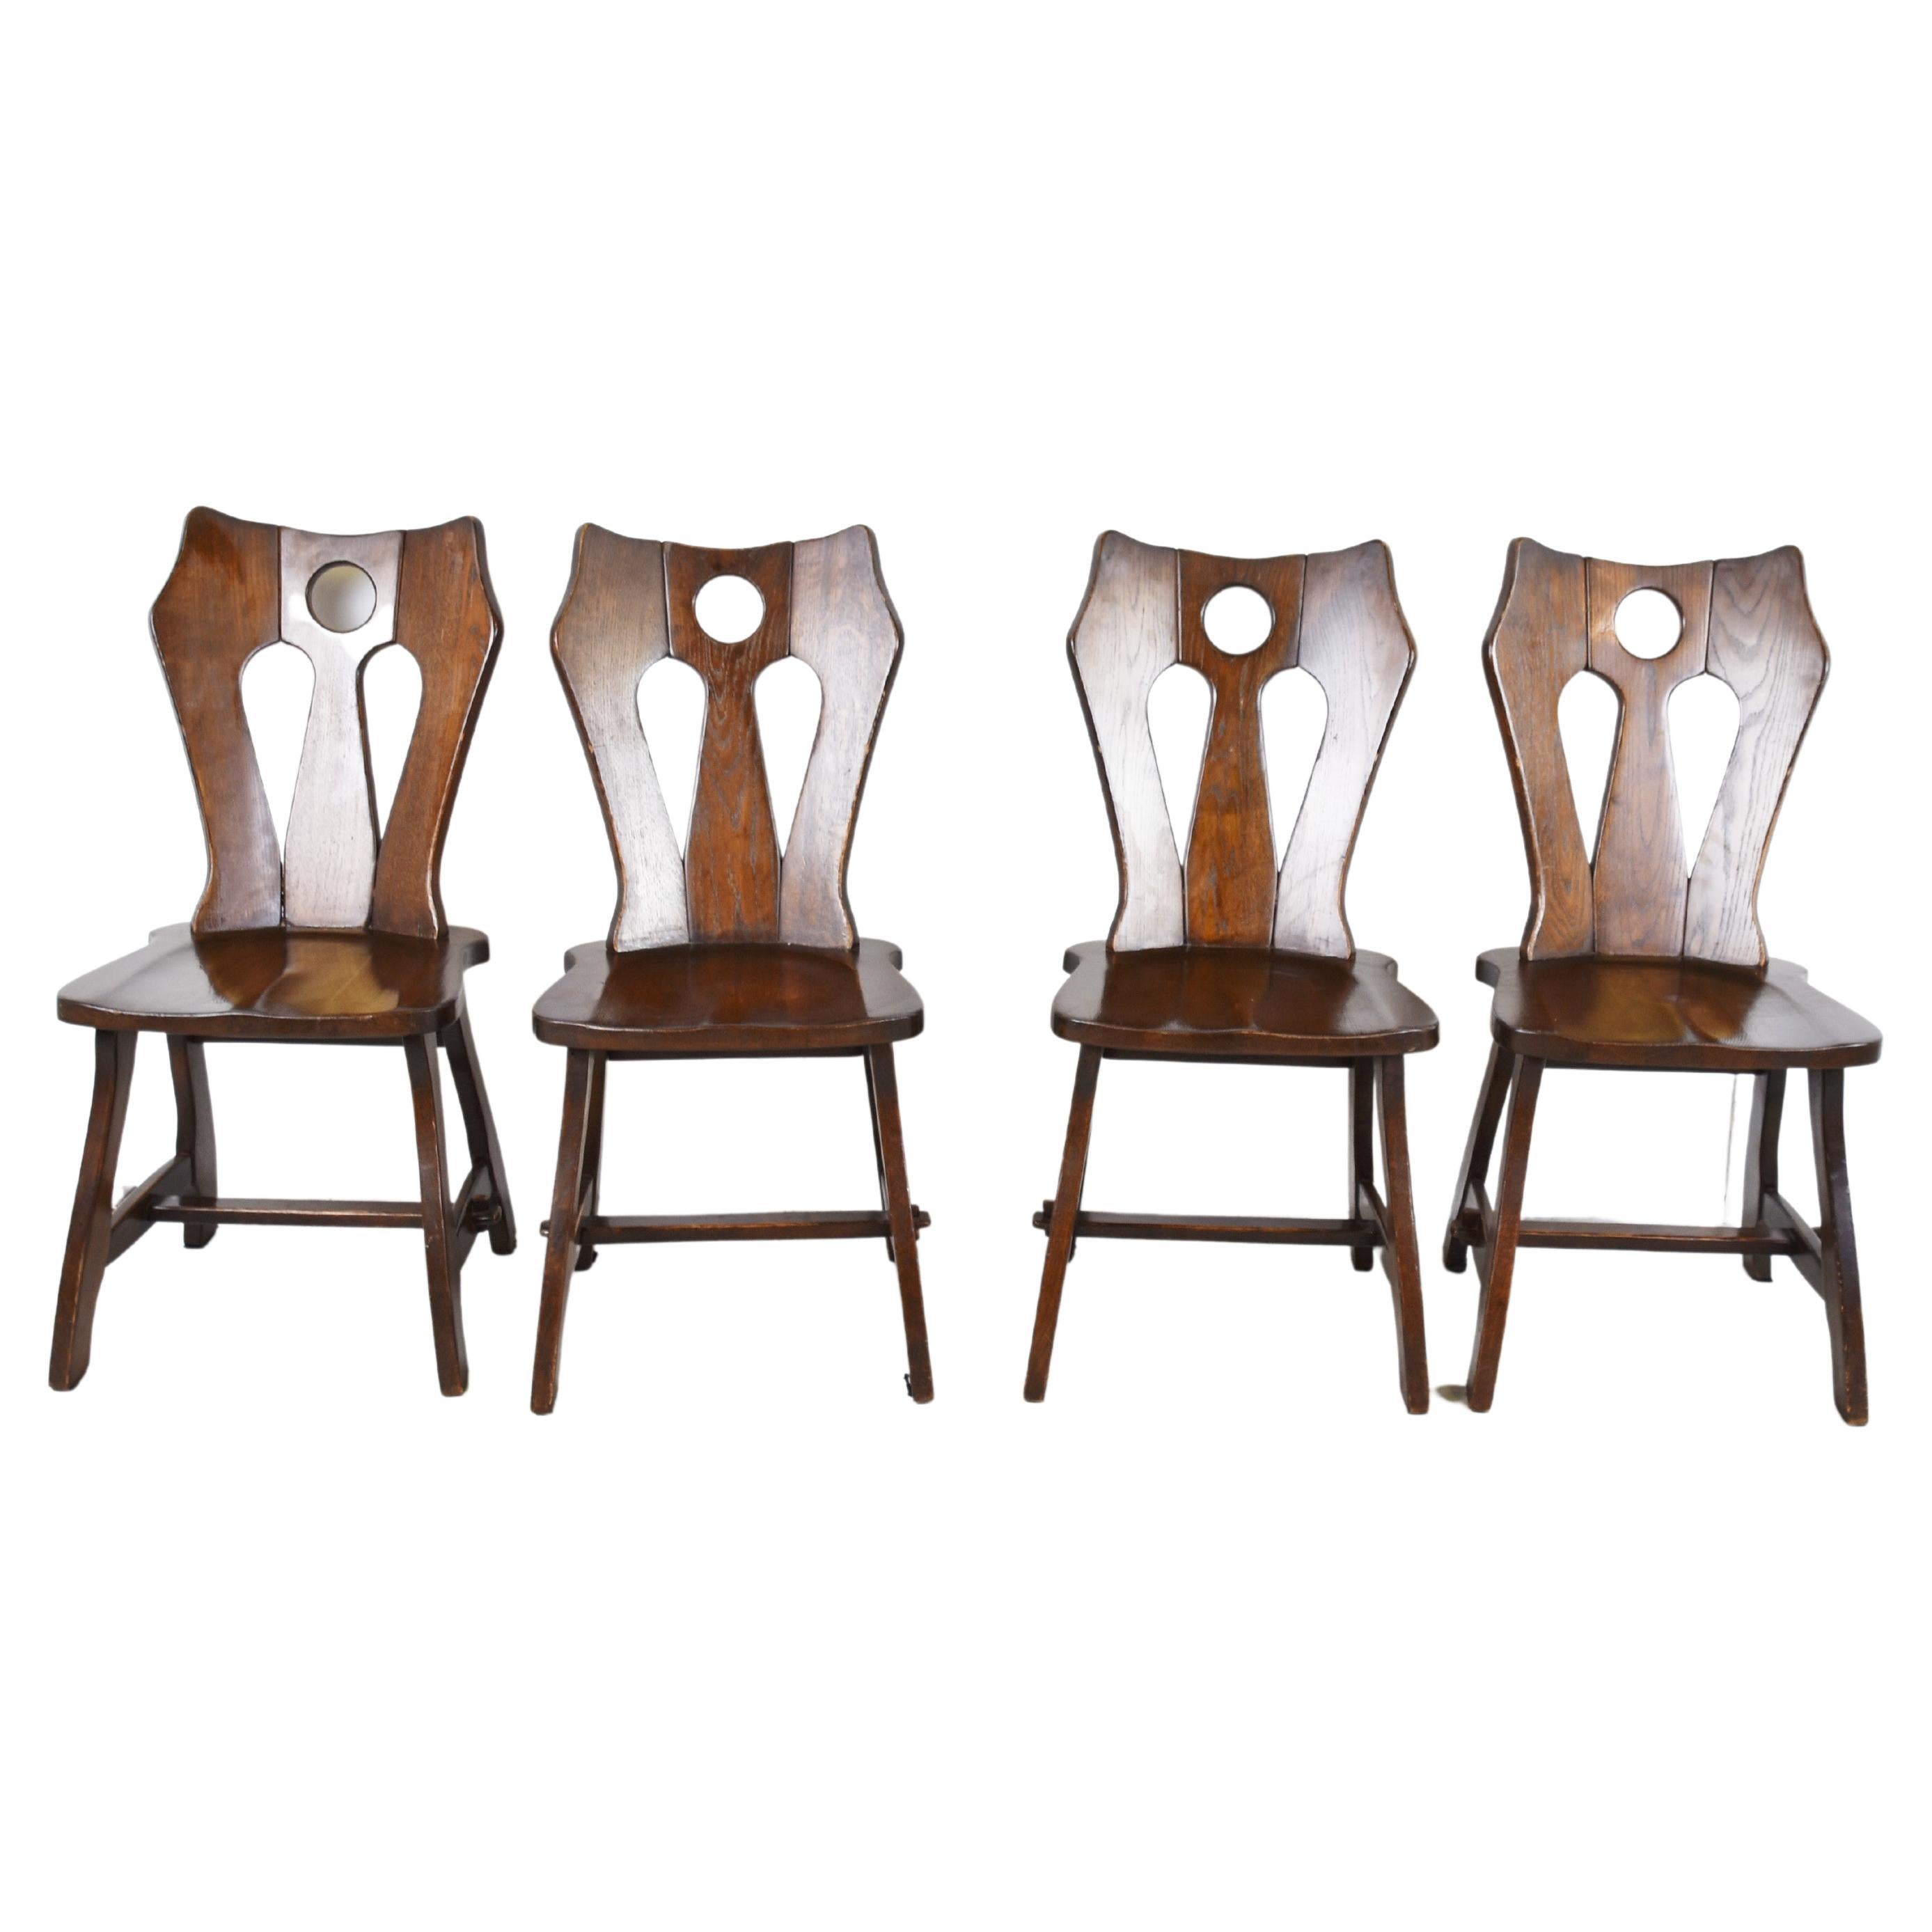 Vintage Brutalist Dining Chairs, 1970s For Sale at 1stDibs